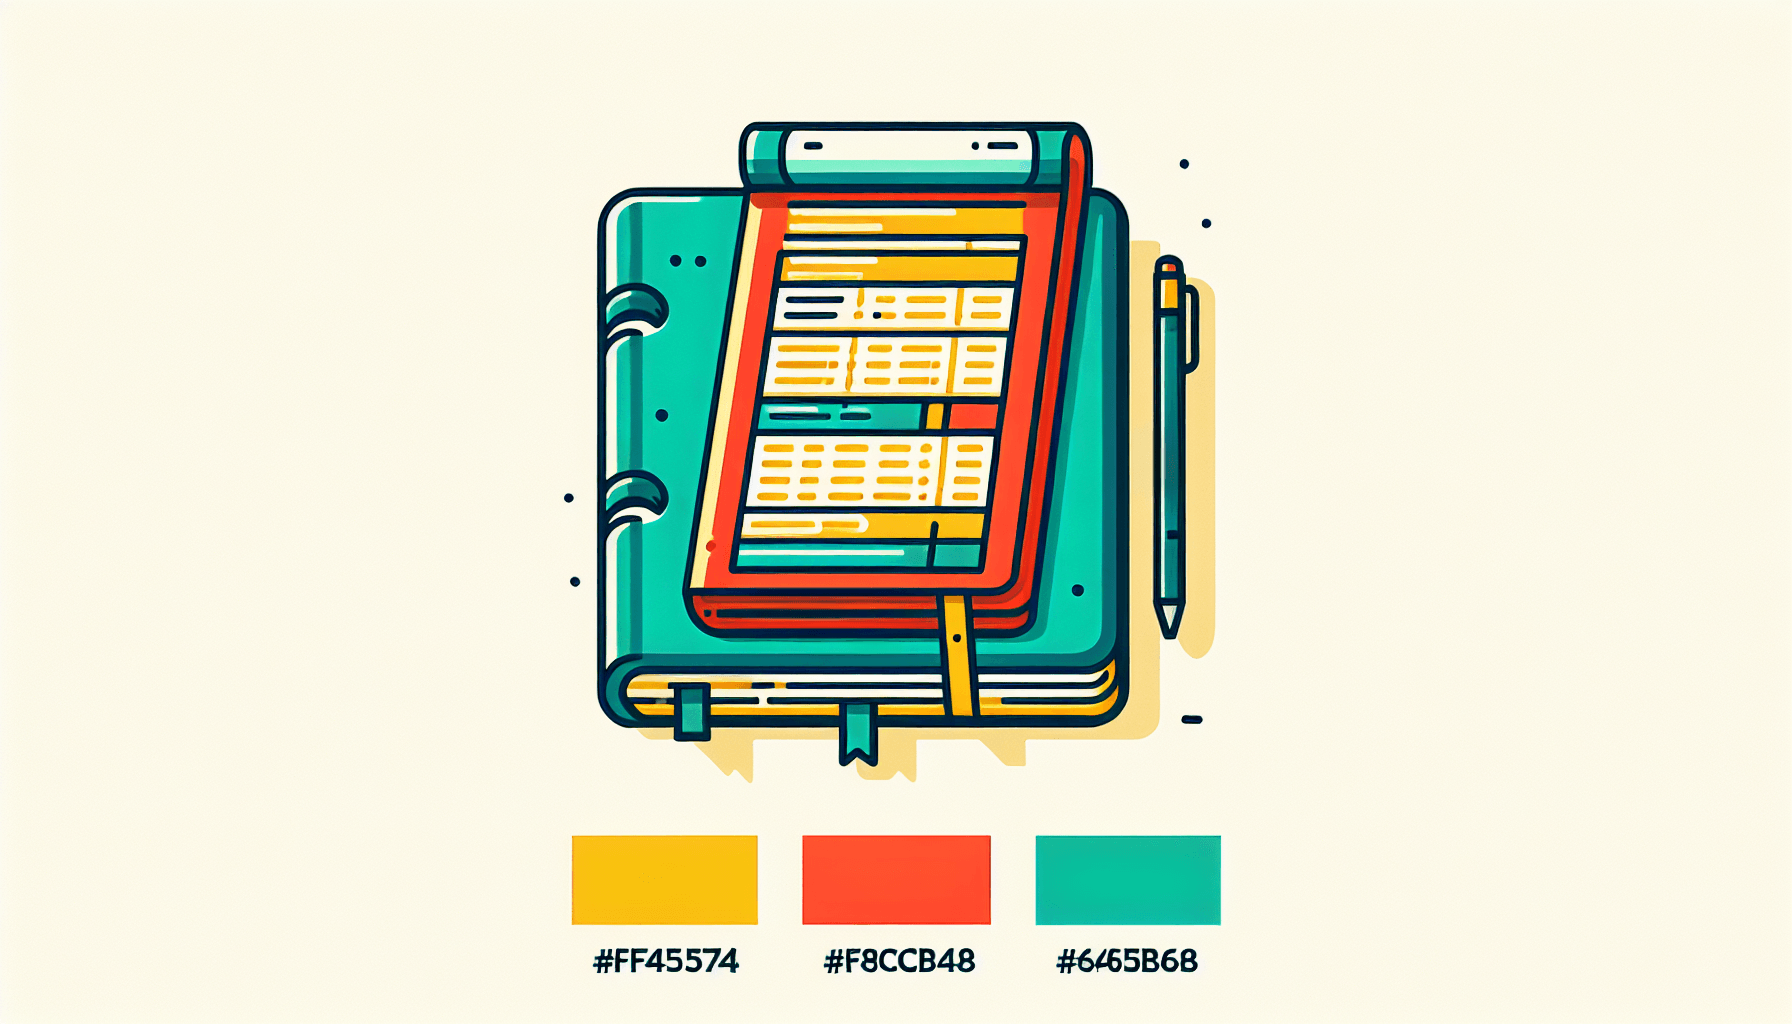 Ledger in flat illustration style and white background, red #f47574, green #88c7a8, yellow #fcc44b, and blue #645bc8 colors.